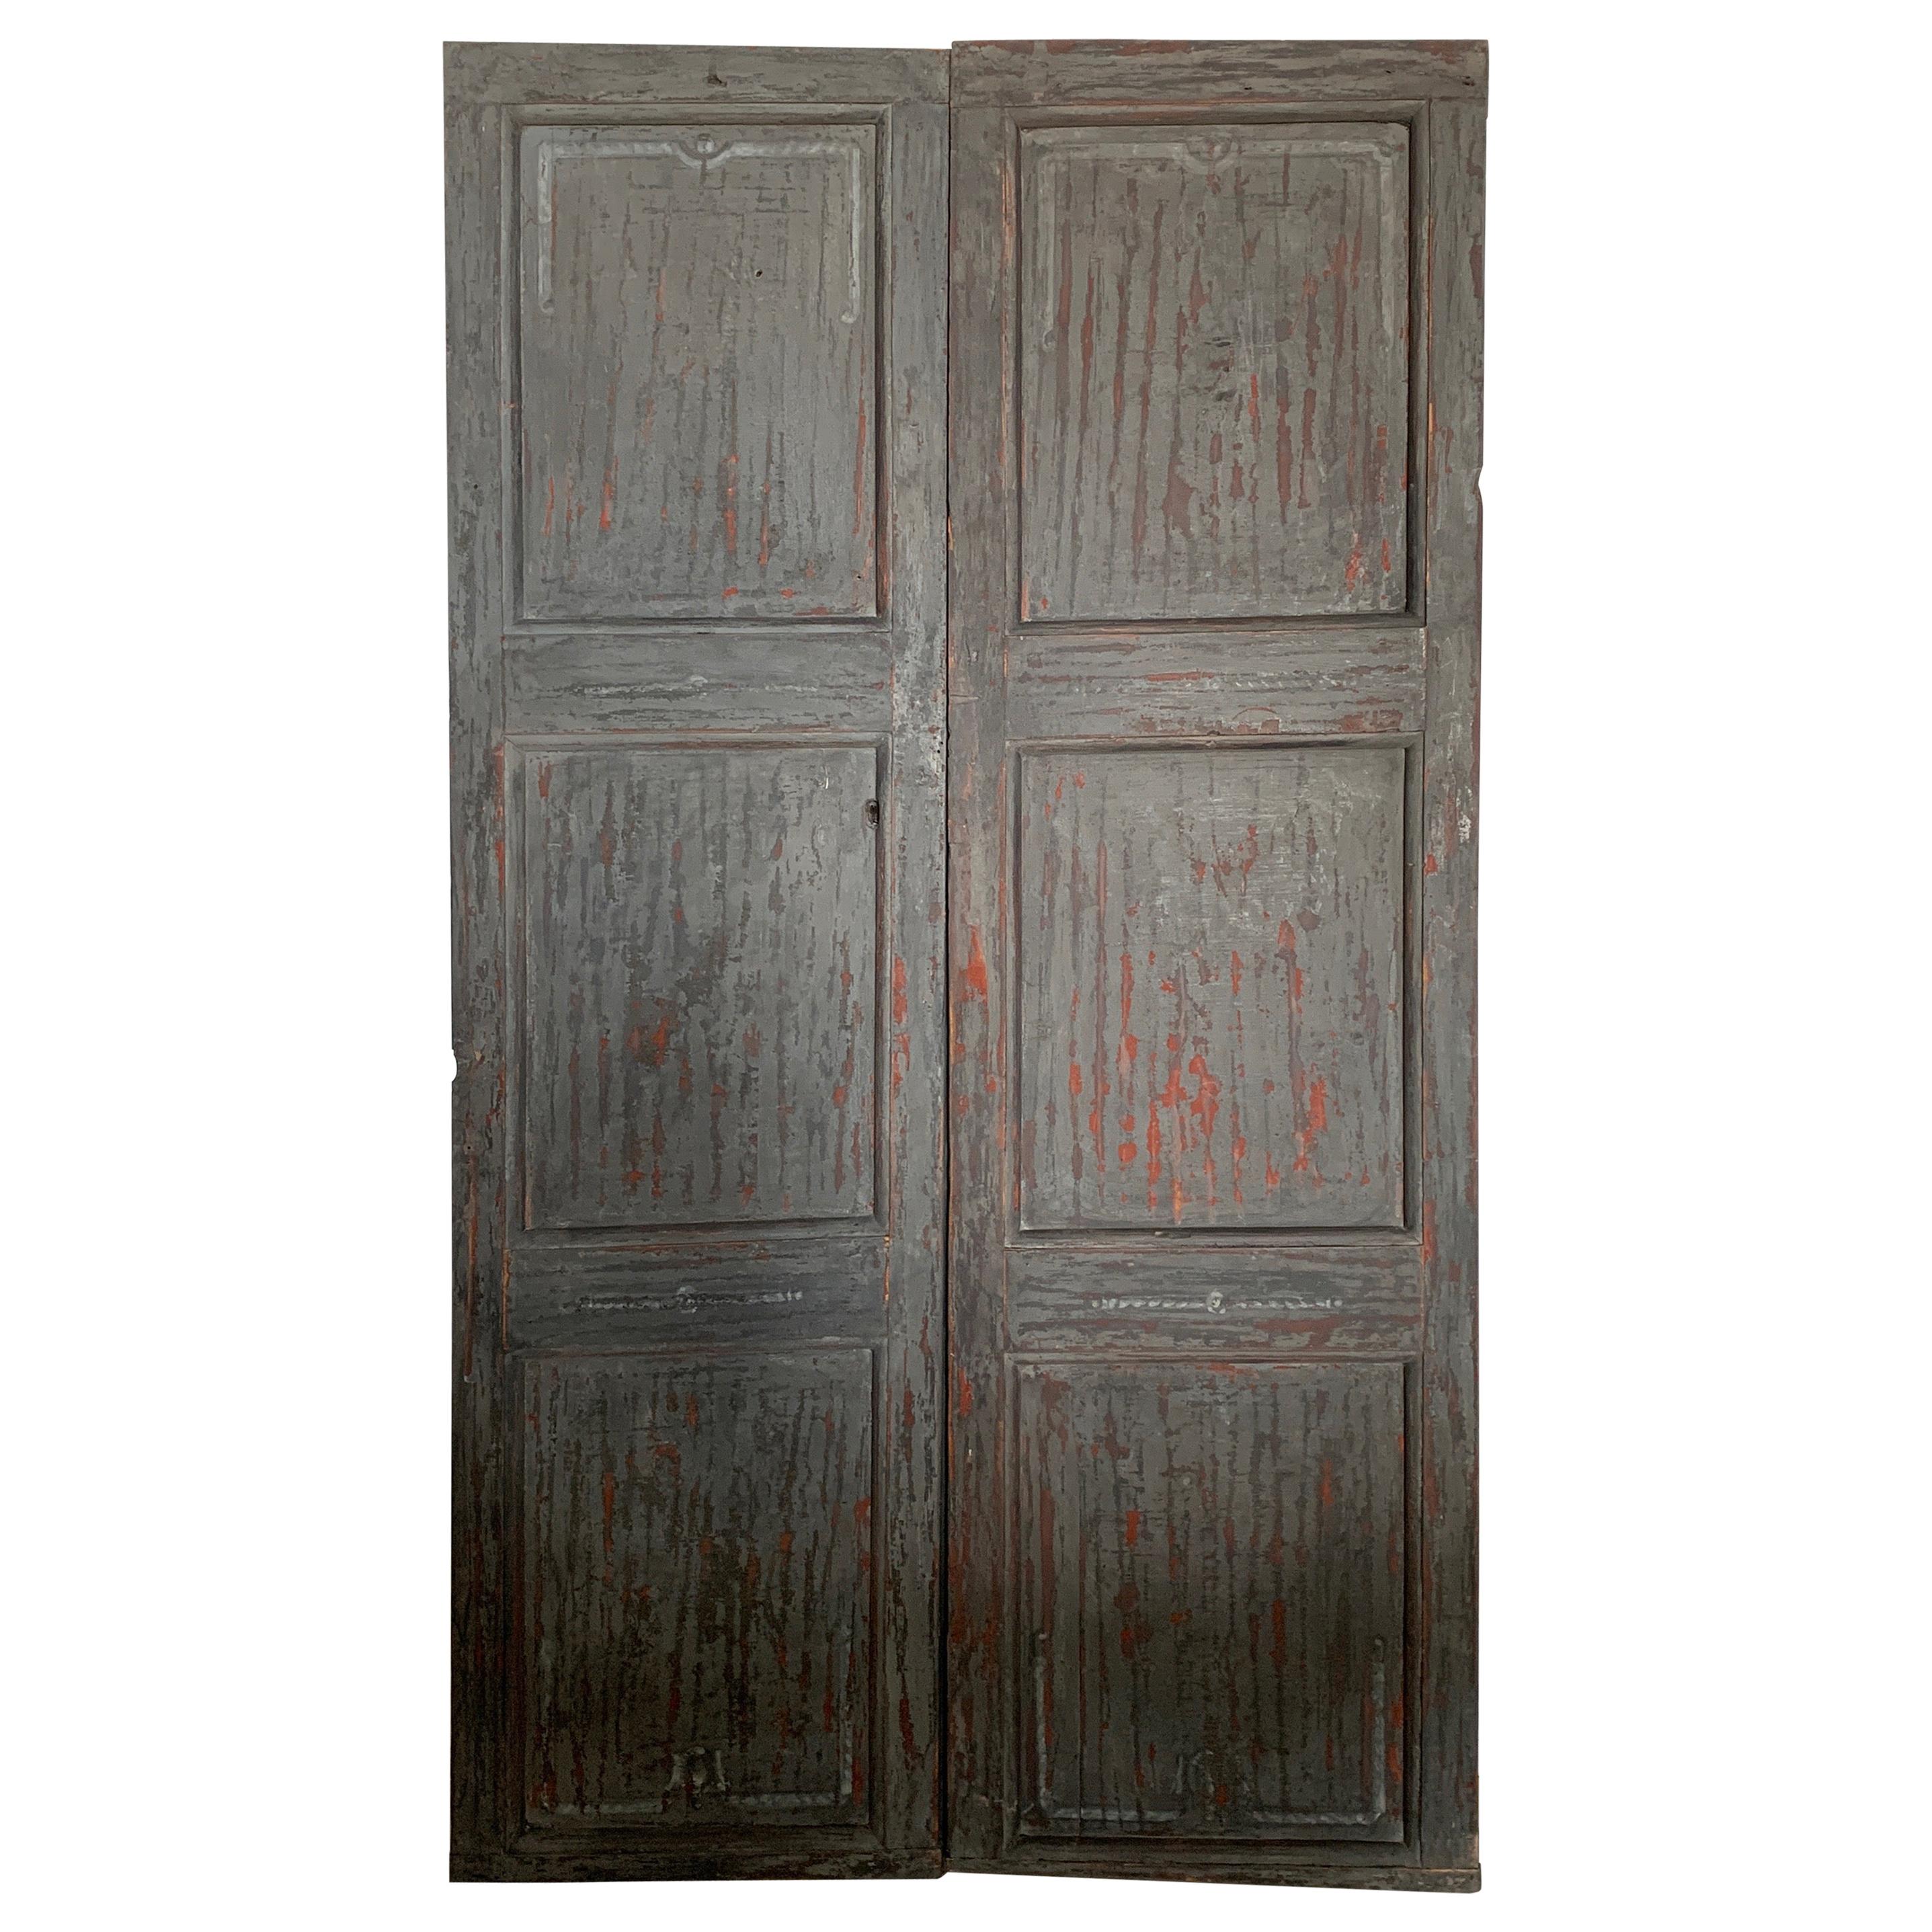 18th Century Spanish Pair of Doors from Peralada with Original Hardware For Sale